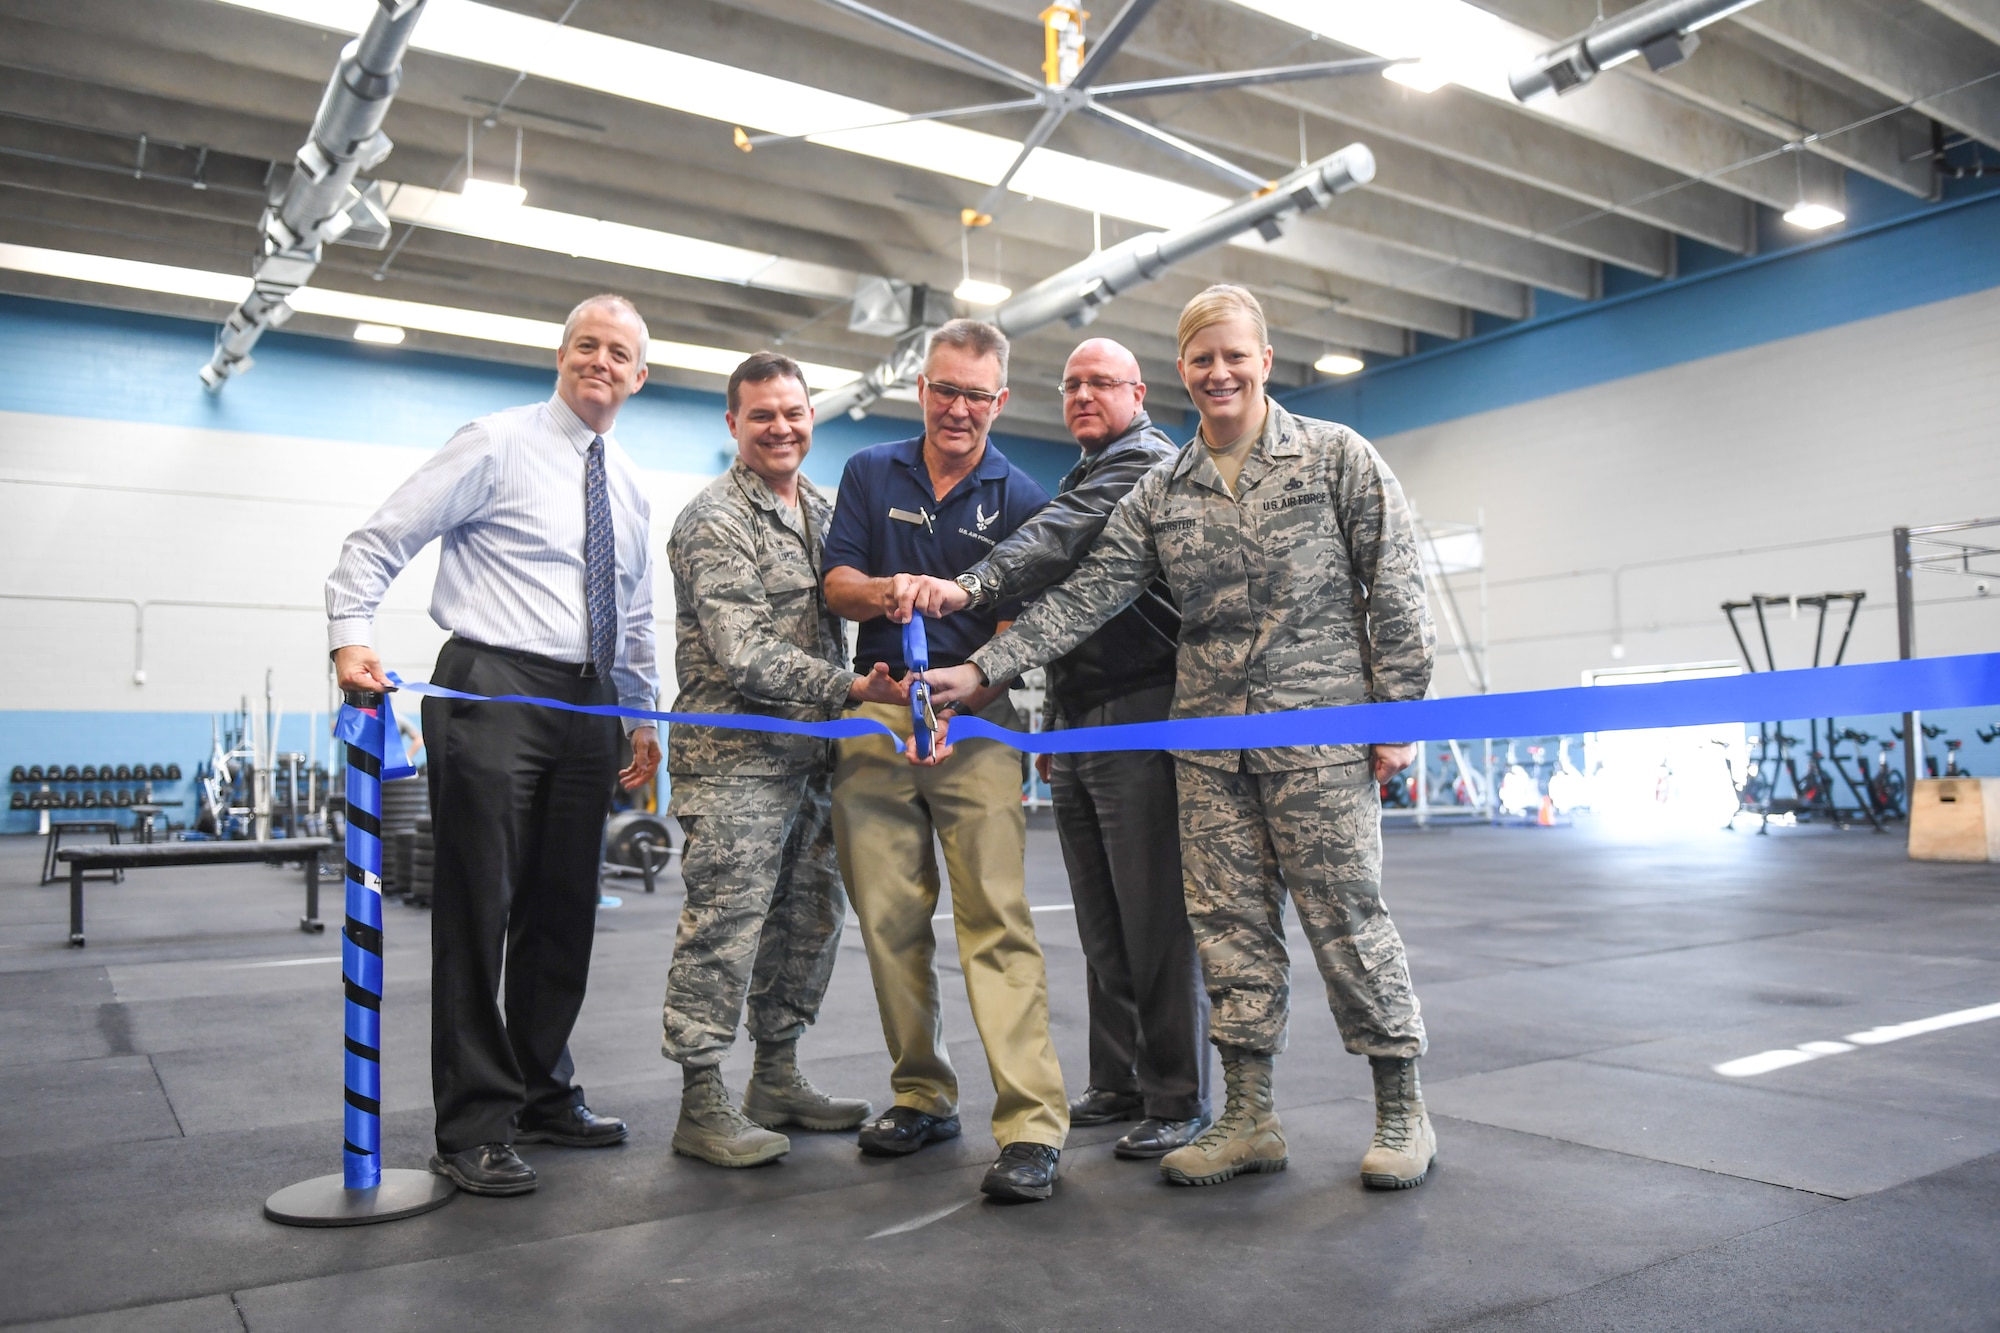 John Cullinane, 75th Force Support Squadron director, Col. Gabriel Lopez, 75th Mission Support Group commander, Jim Tyson, fitness director, Harry Briesmaster, 75th Civil Engineering Group director, and Col. Jennifer Hammerstedt, 75th Air Base Wing commander, cut the ceremonial ribbon March 27, 2018, to commemorate the grand opening of the Hess Fitness Center's functional training area at Hill Air Force Base, Utah. (U.S. Air Force photo by Cynthia Griggs)